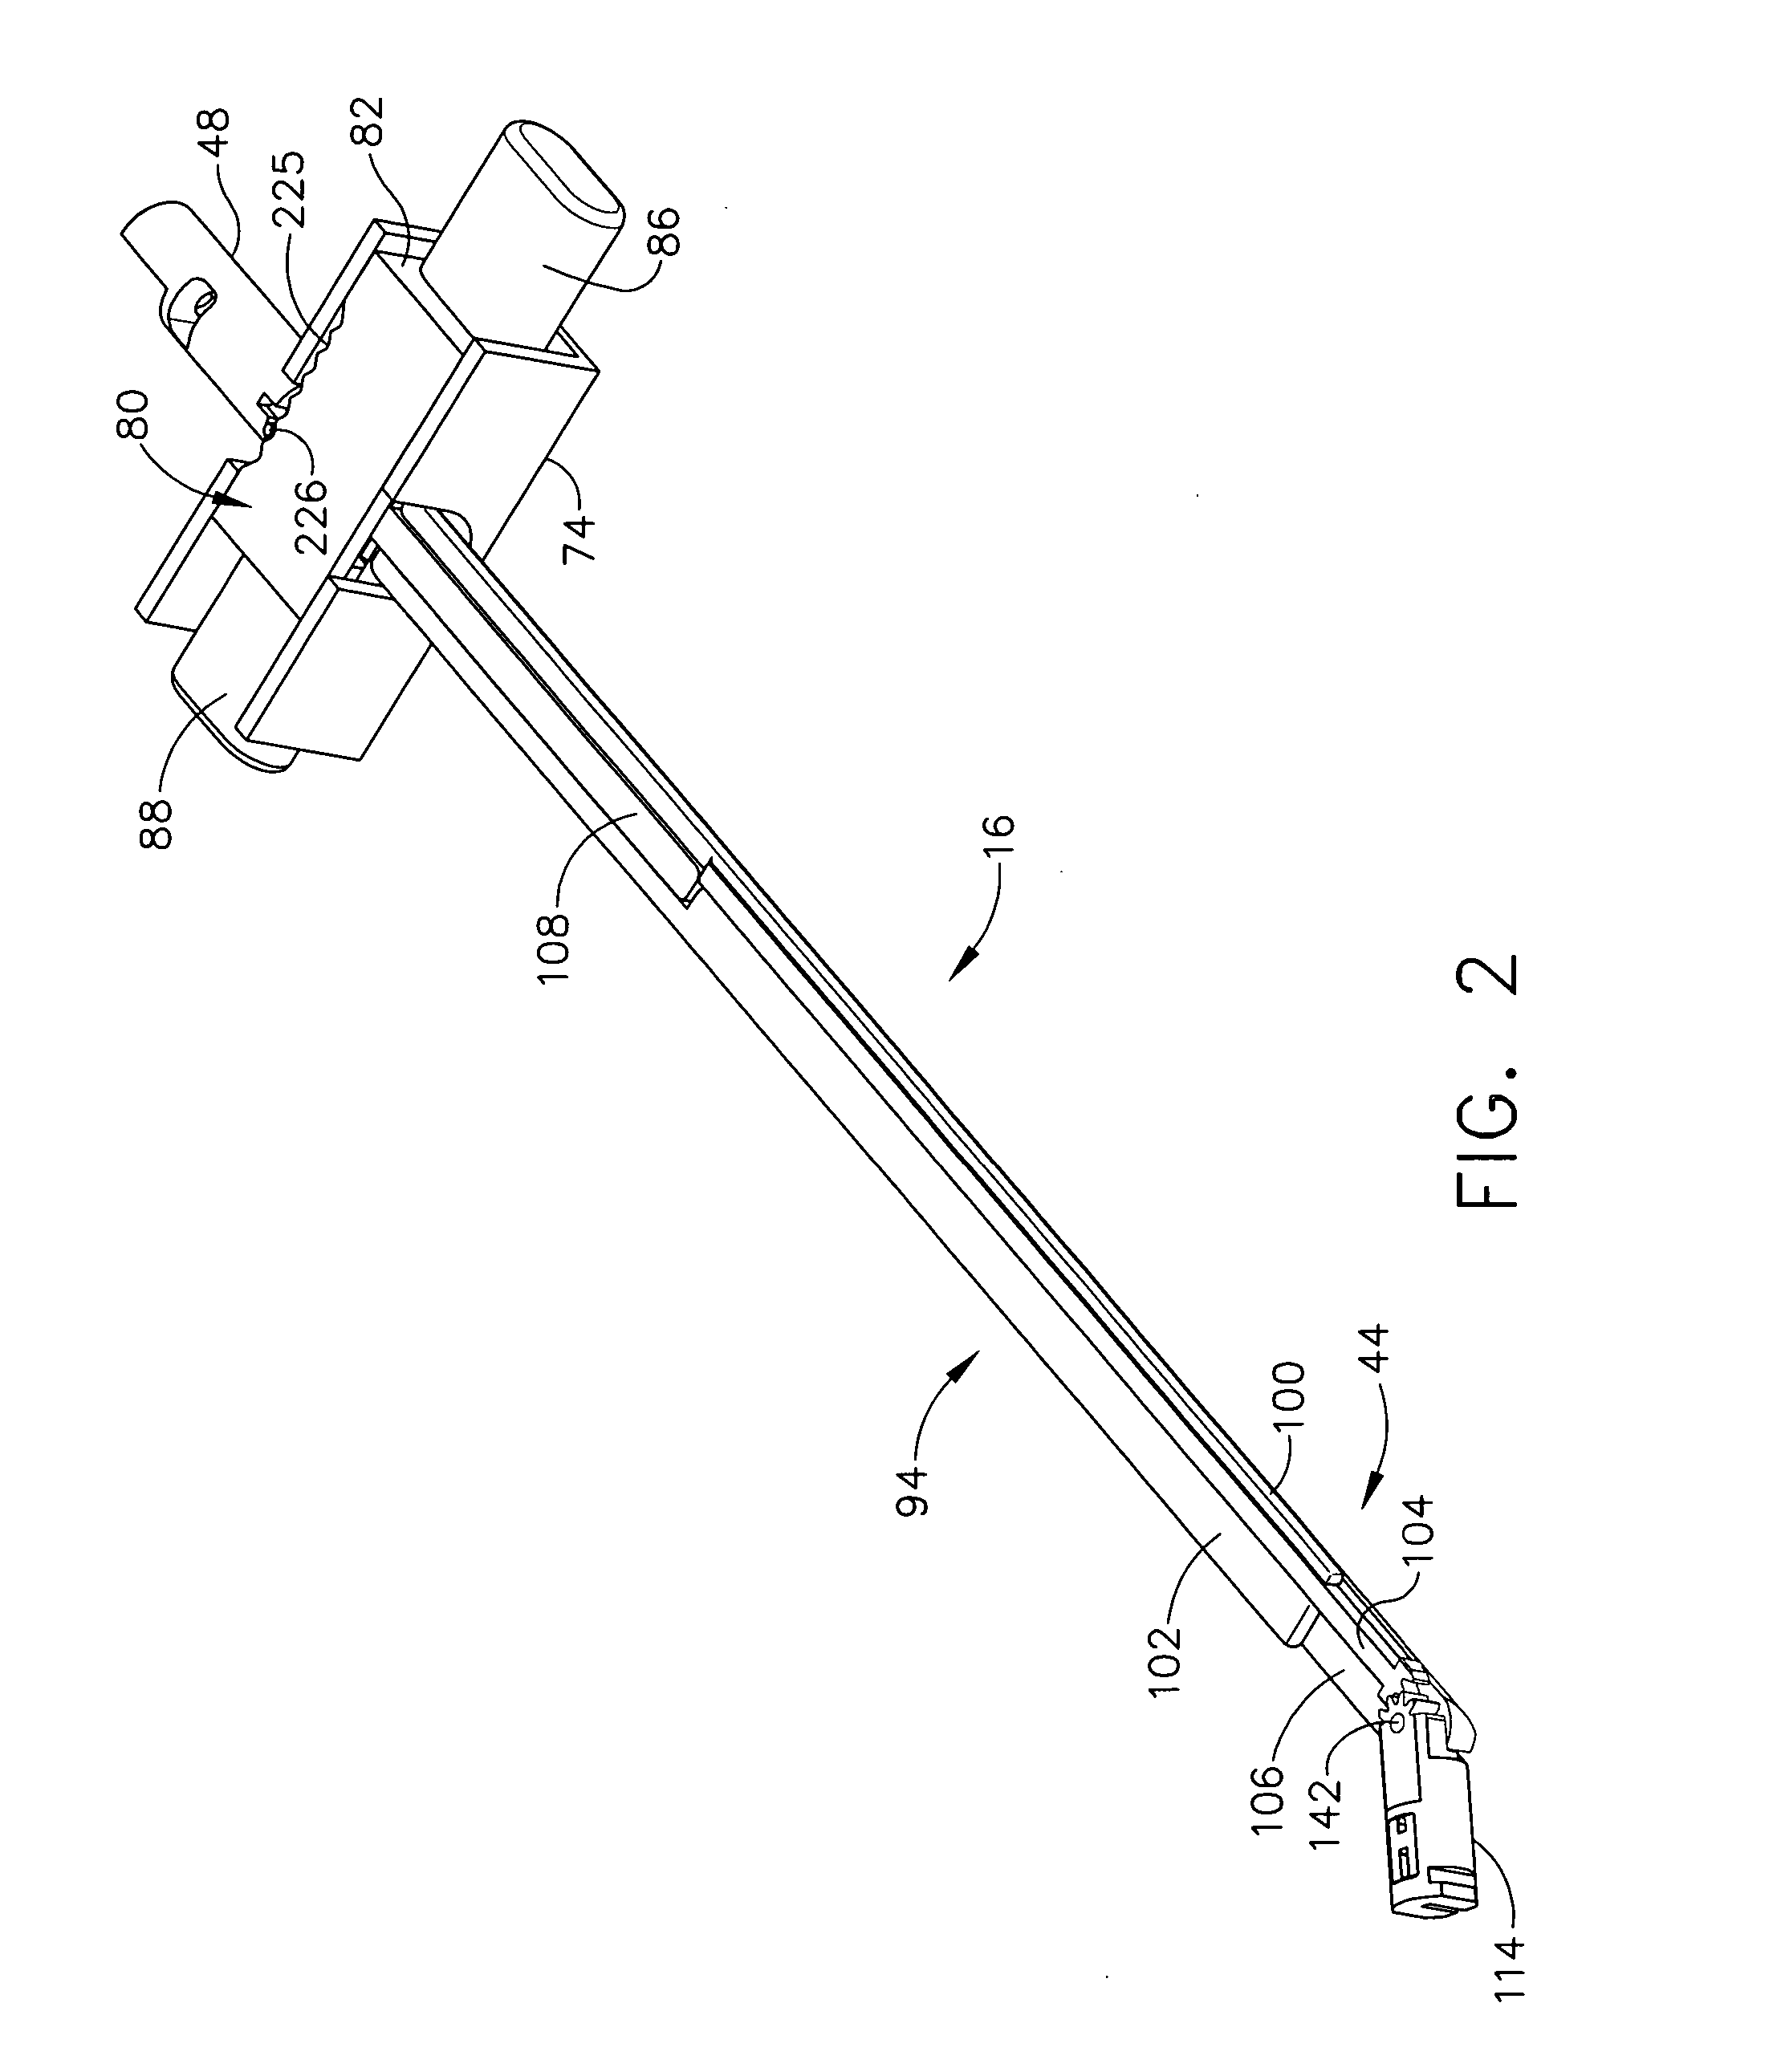 Surgical instrument incorporating a fluid transfer controlled articulation bladder and method of manufacture